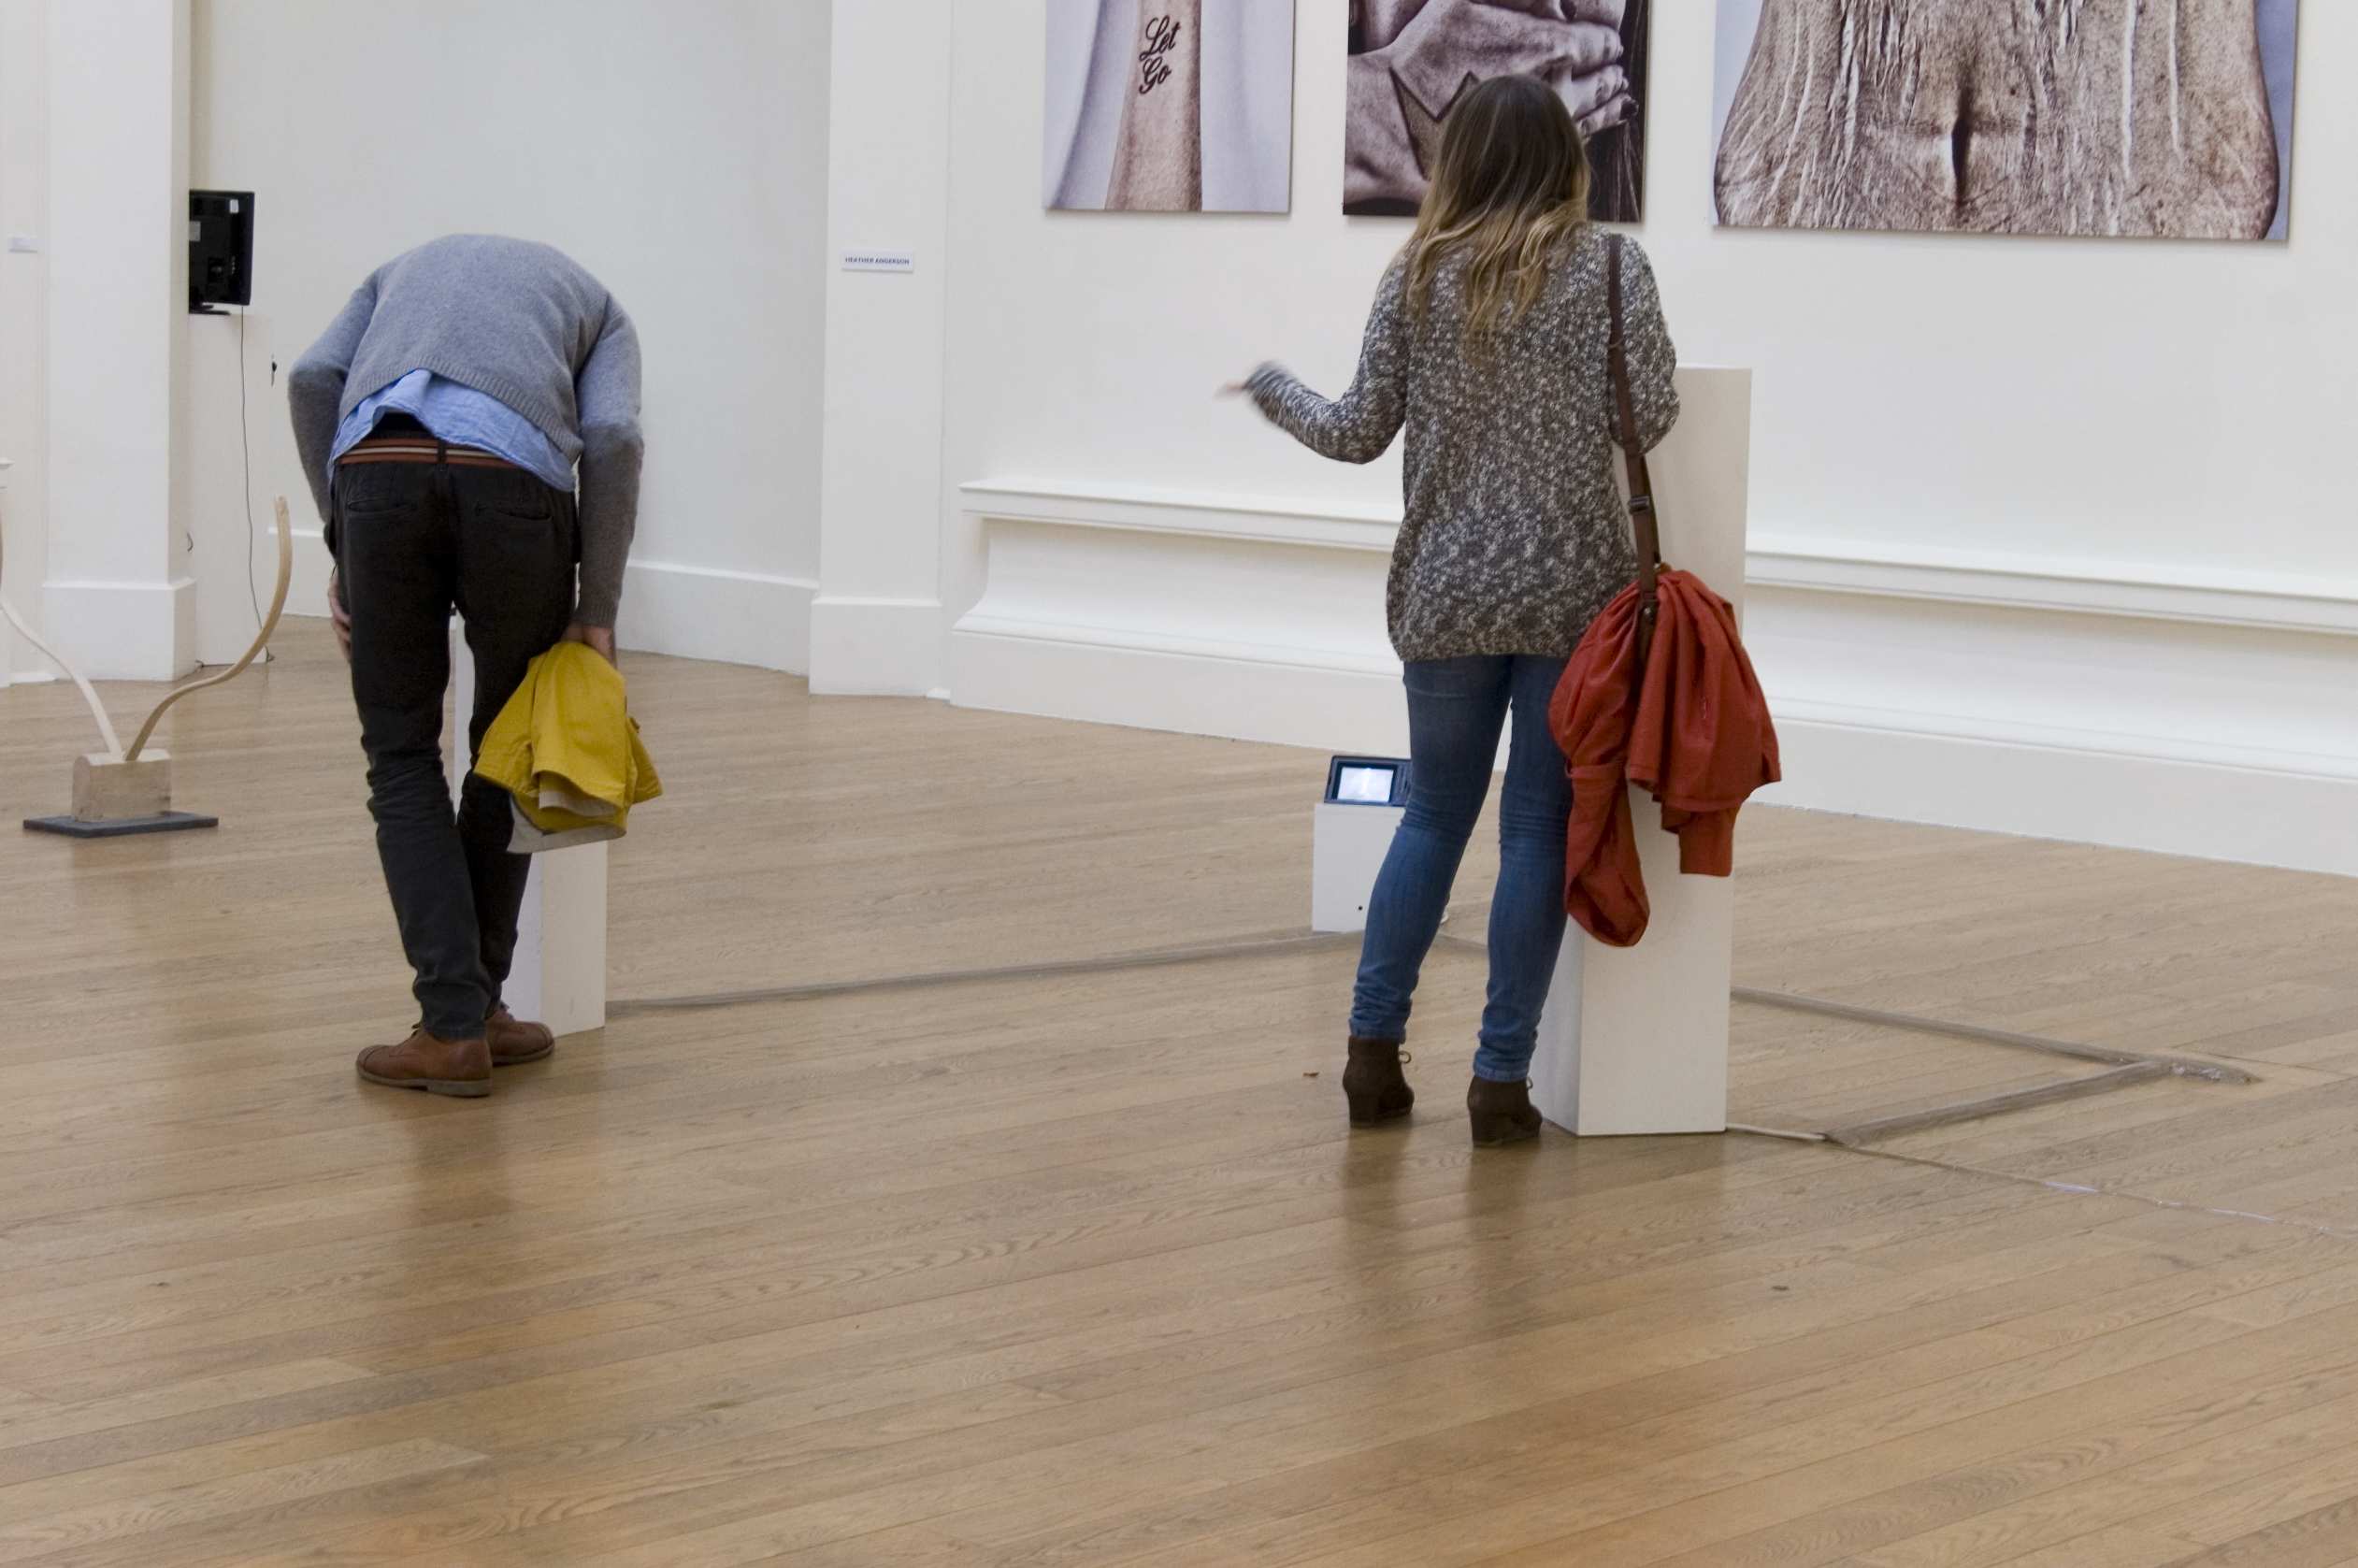 A gallery space. Two white plinths are on the floor, a couple of metres apart. A man is looking into one of them, while a woman stands beside the second, she is pointing at the man.